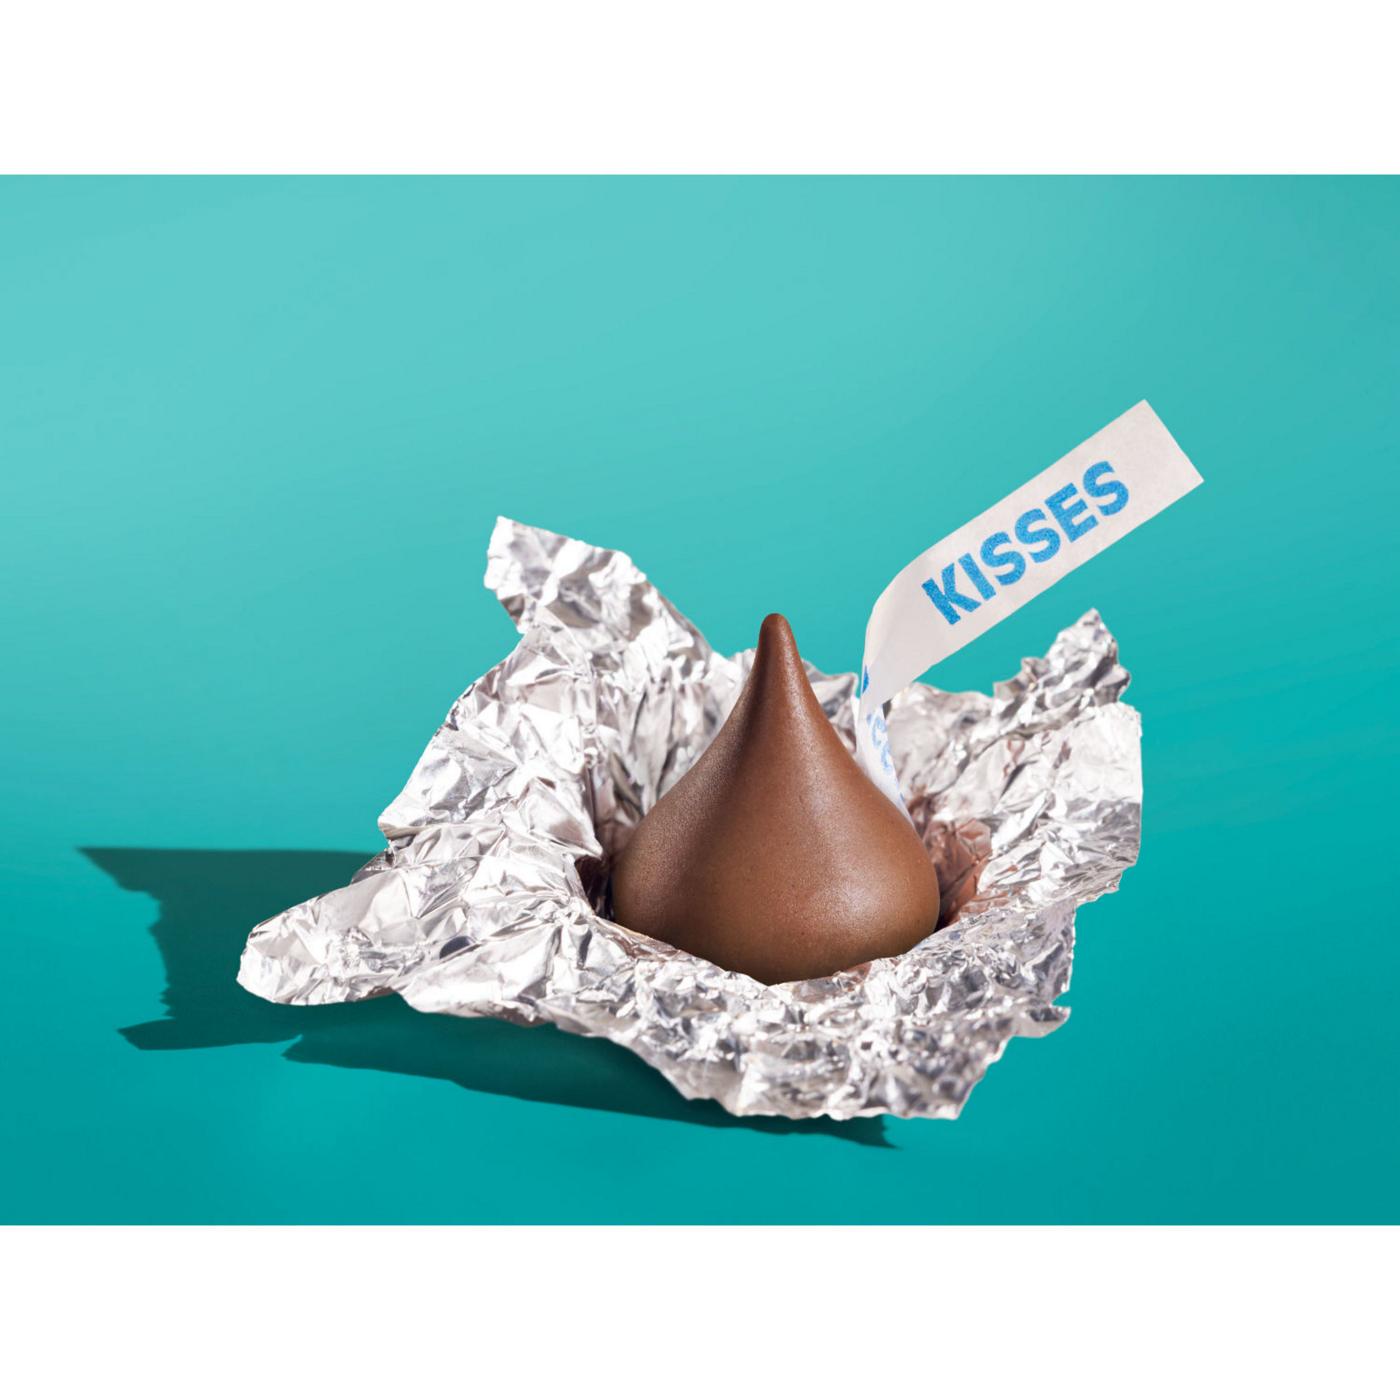 Hershey's Kisses Milk Chocolate Candy; image 3 of 7